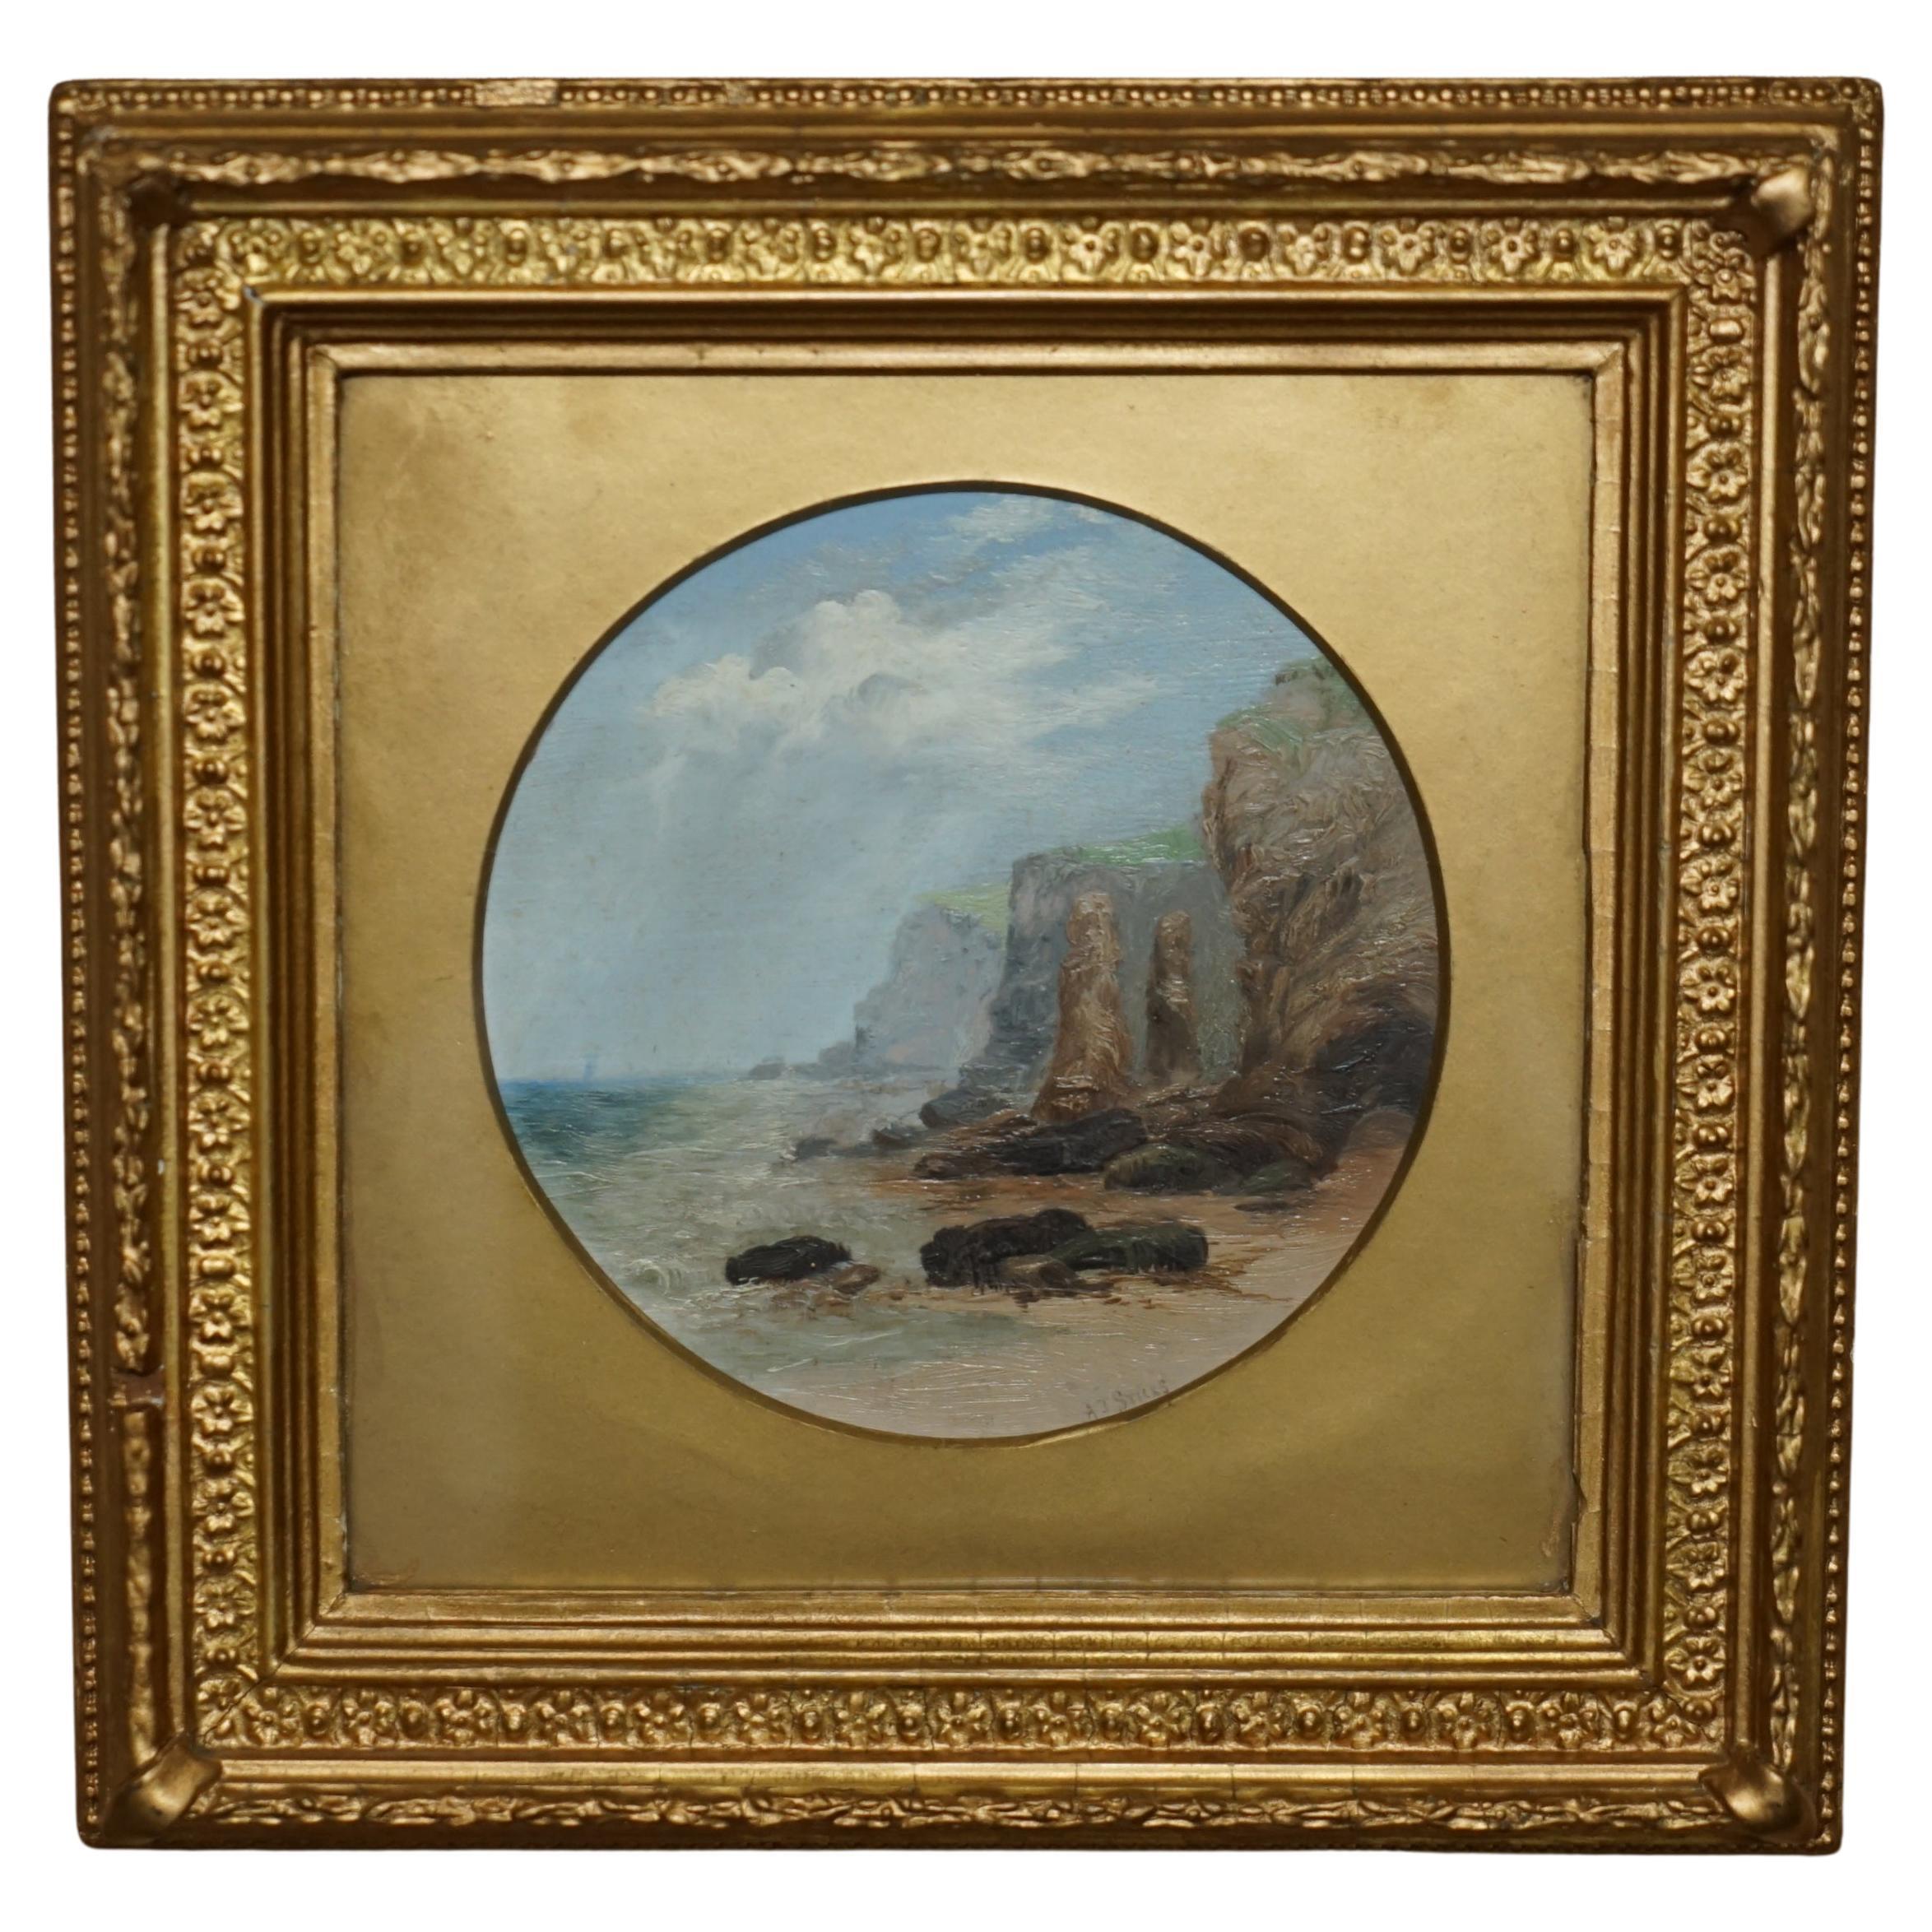 EXQUISITE A J STICKS SIGNED SMALL OIL PAINTING FRAME BY S L NIELSEN SEA & CLIFFs For Sale